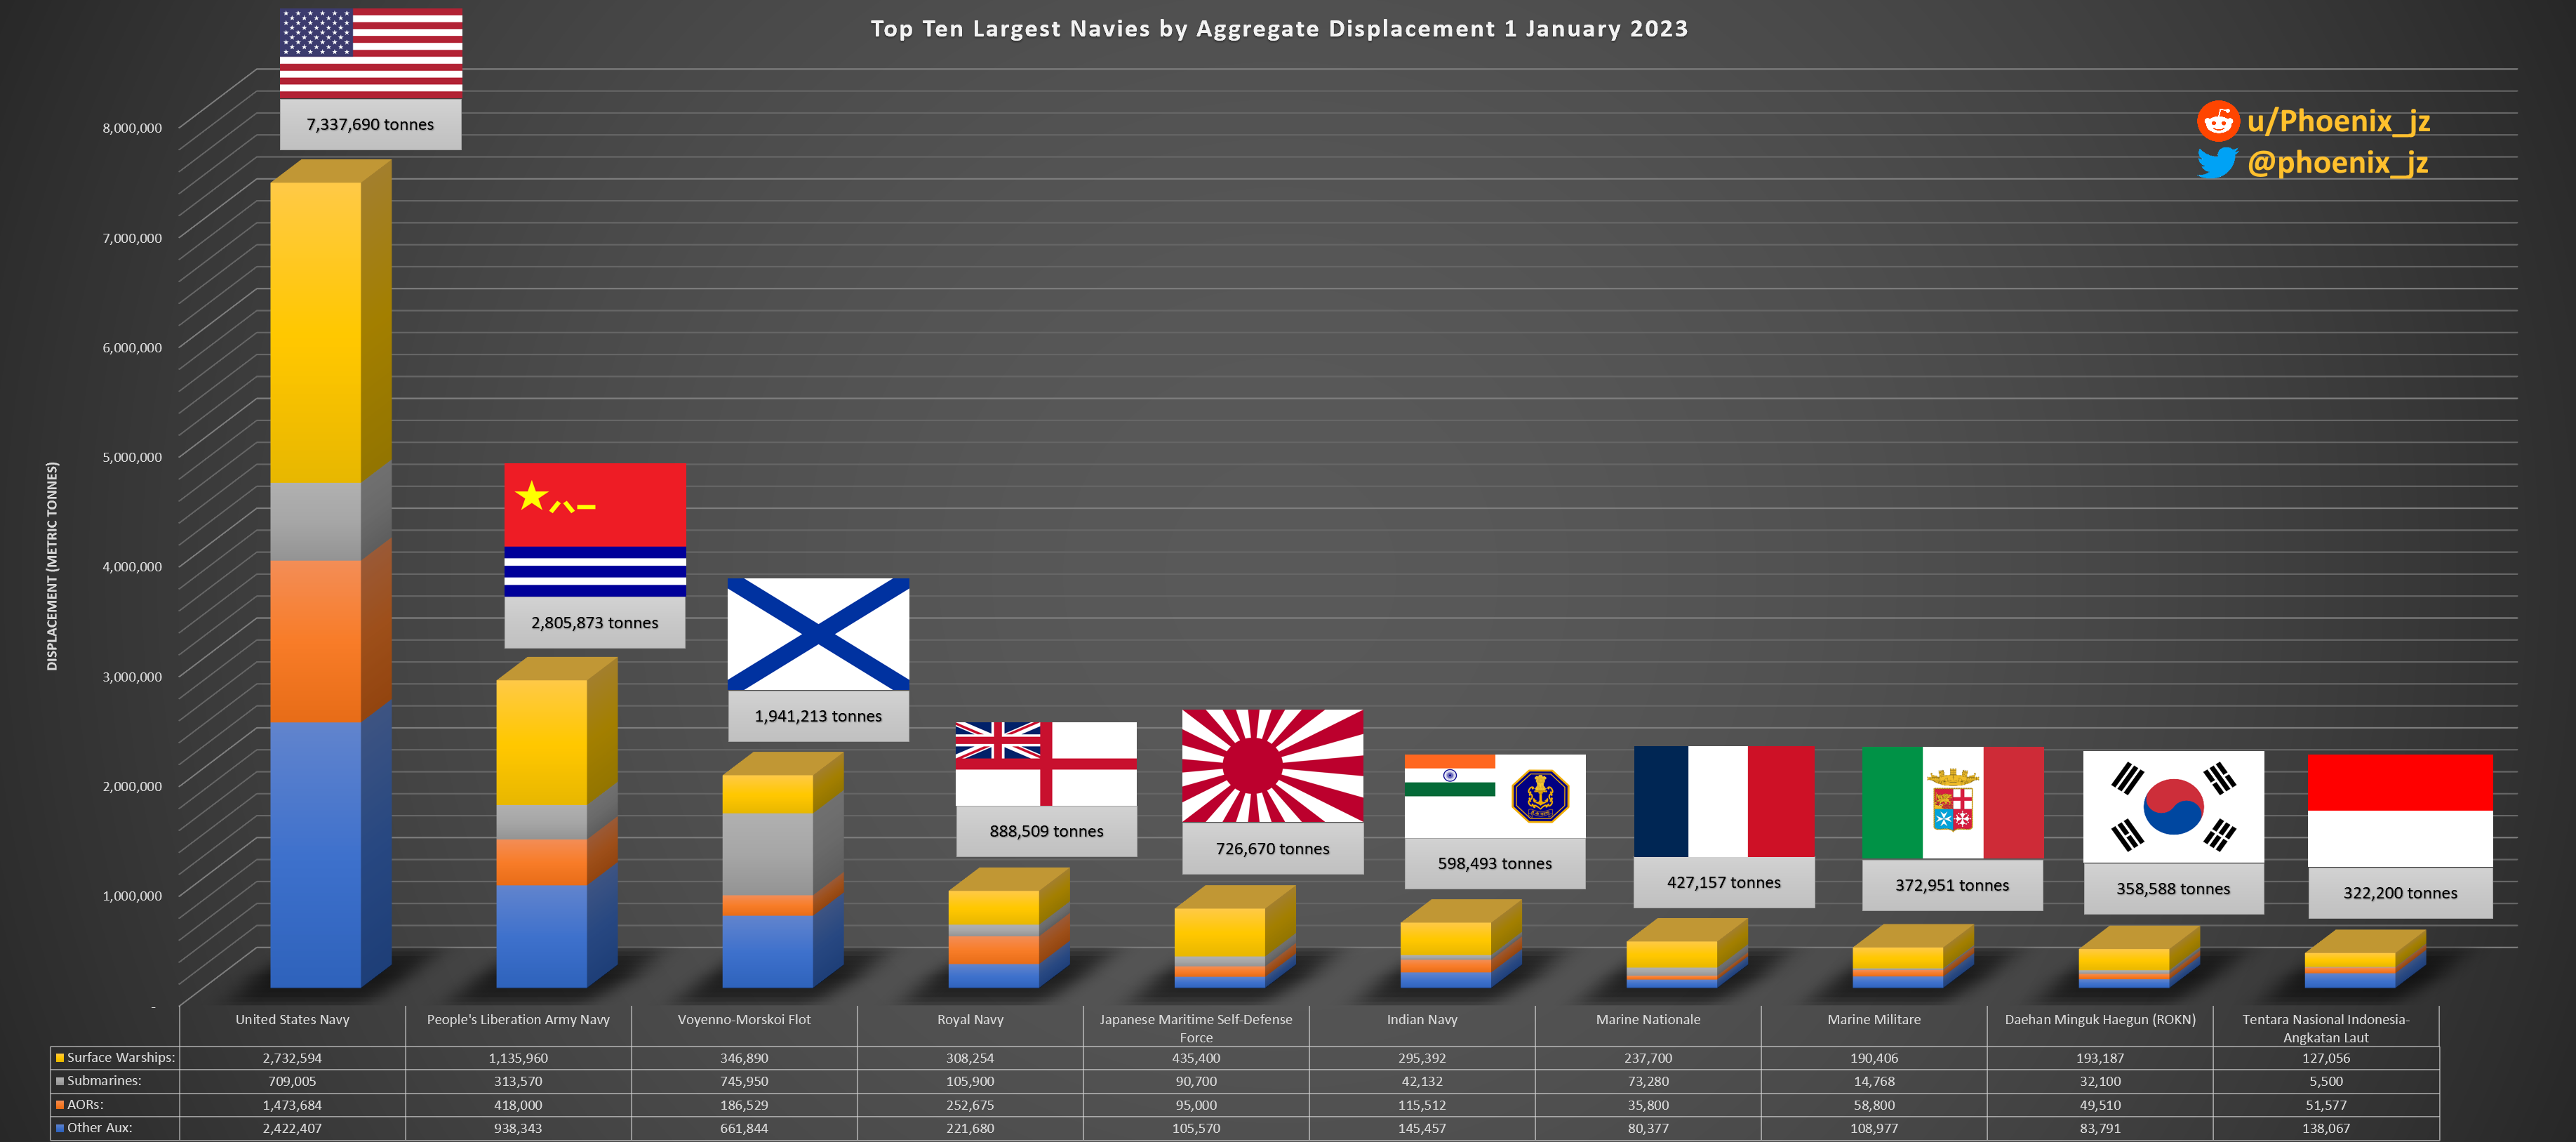 top-ten-navies-by-aggregate-displacement-1-january-2023-v0-xjv7jb2o0o9a1.png